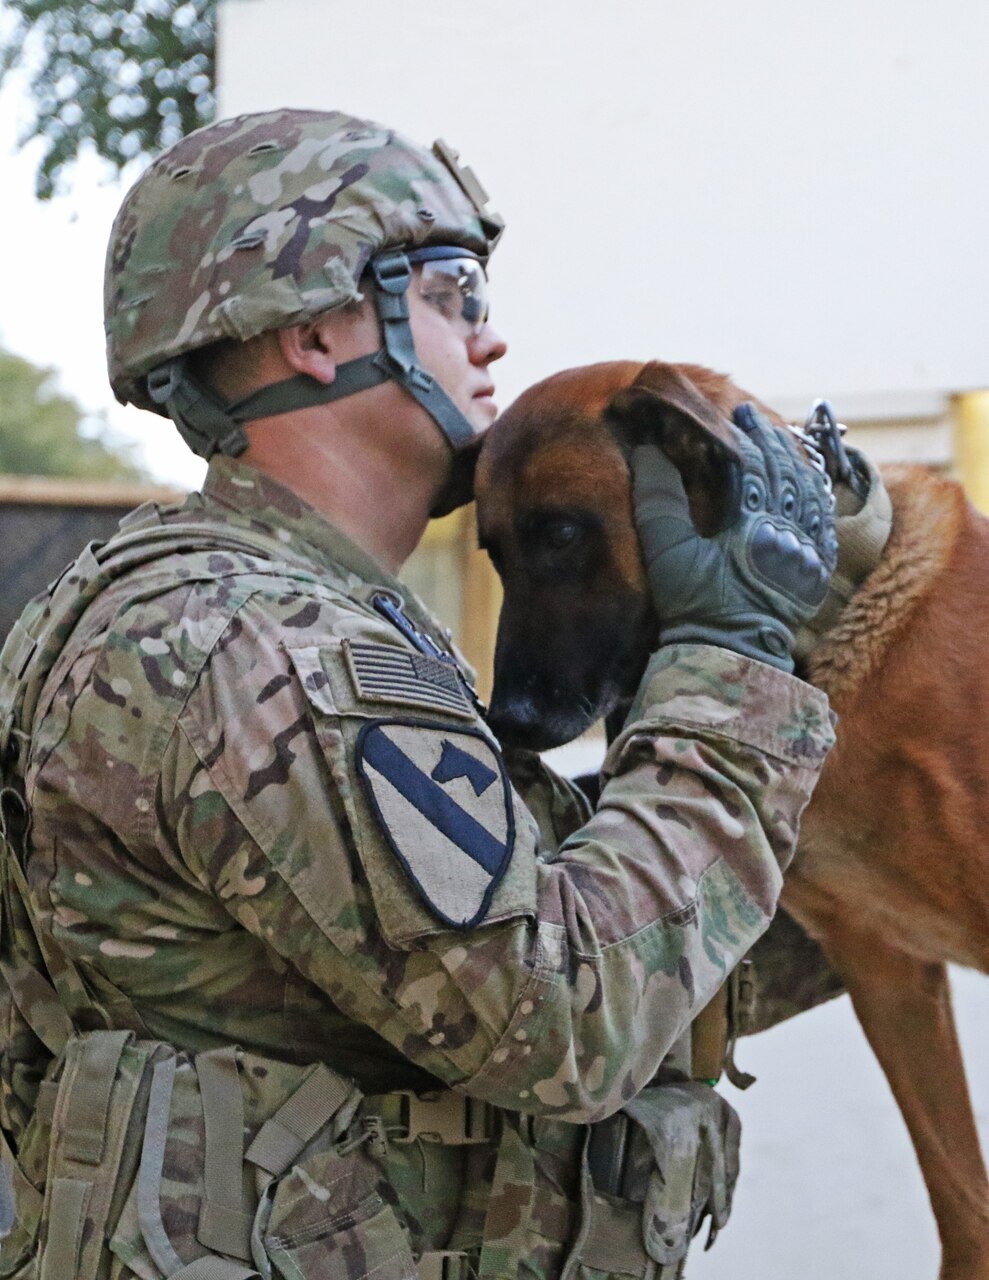 Rrobiek, a Belgian Malinois military working dog, and his handler, Army Staff Sgt. Charles Ogin, 3rd Infantry Regiment, bond with each other during work, in Baghdad, Feb. 15, 2017. Army photo by Sgt. Anna Pongo